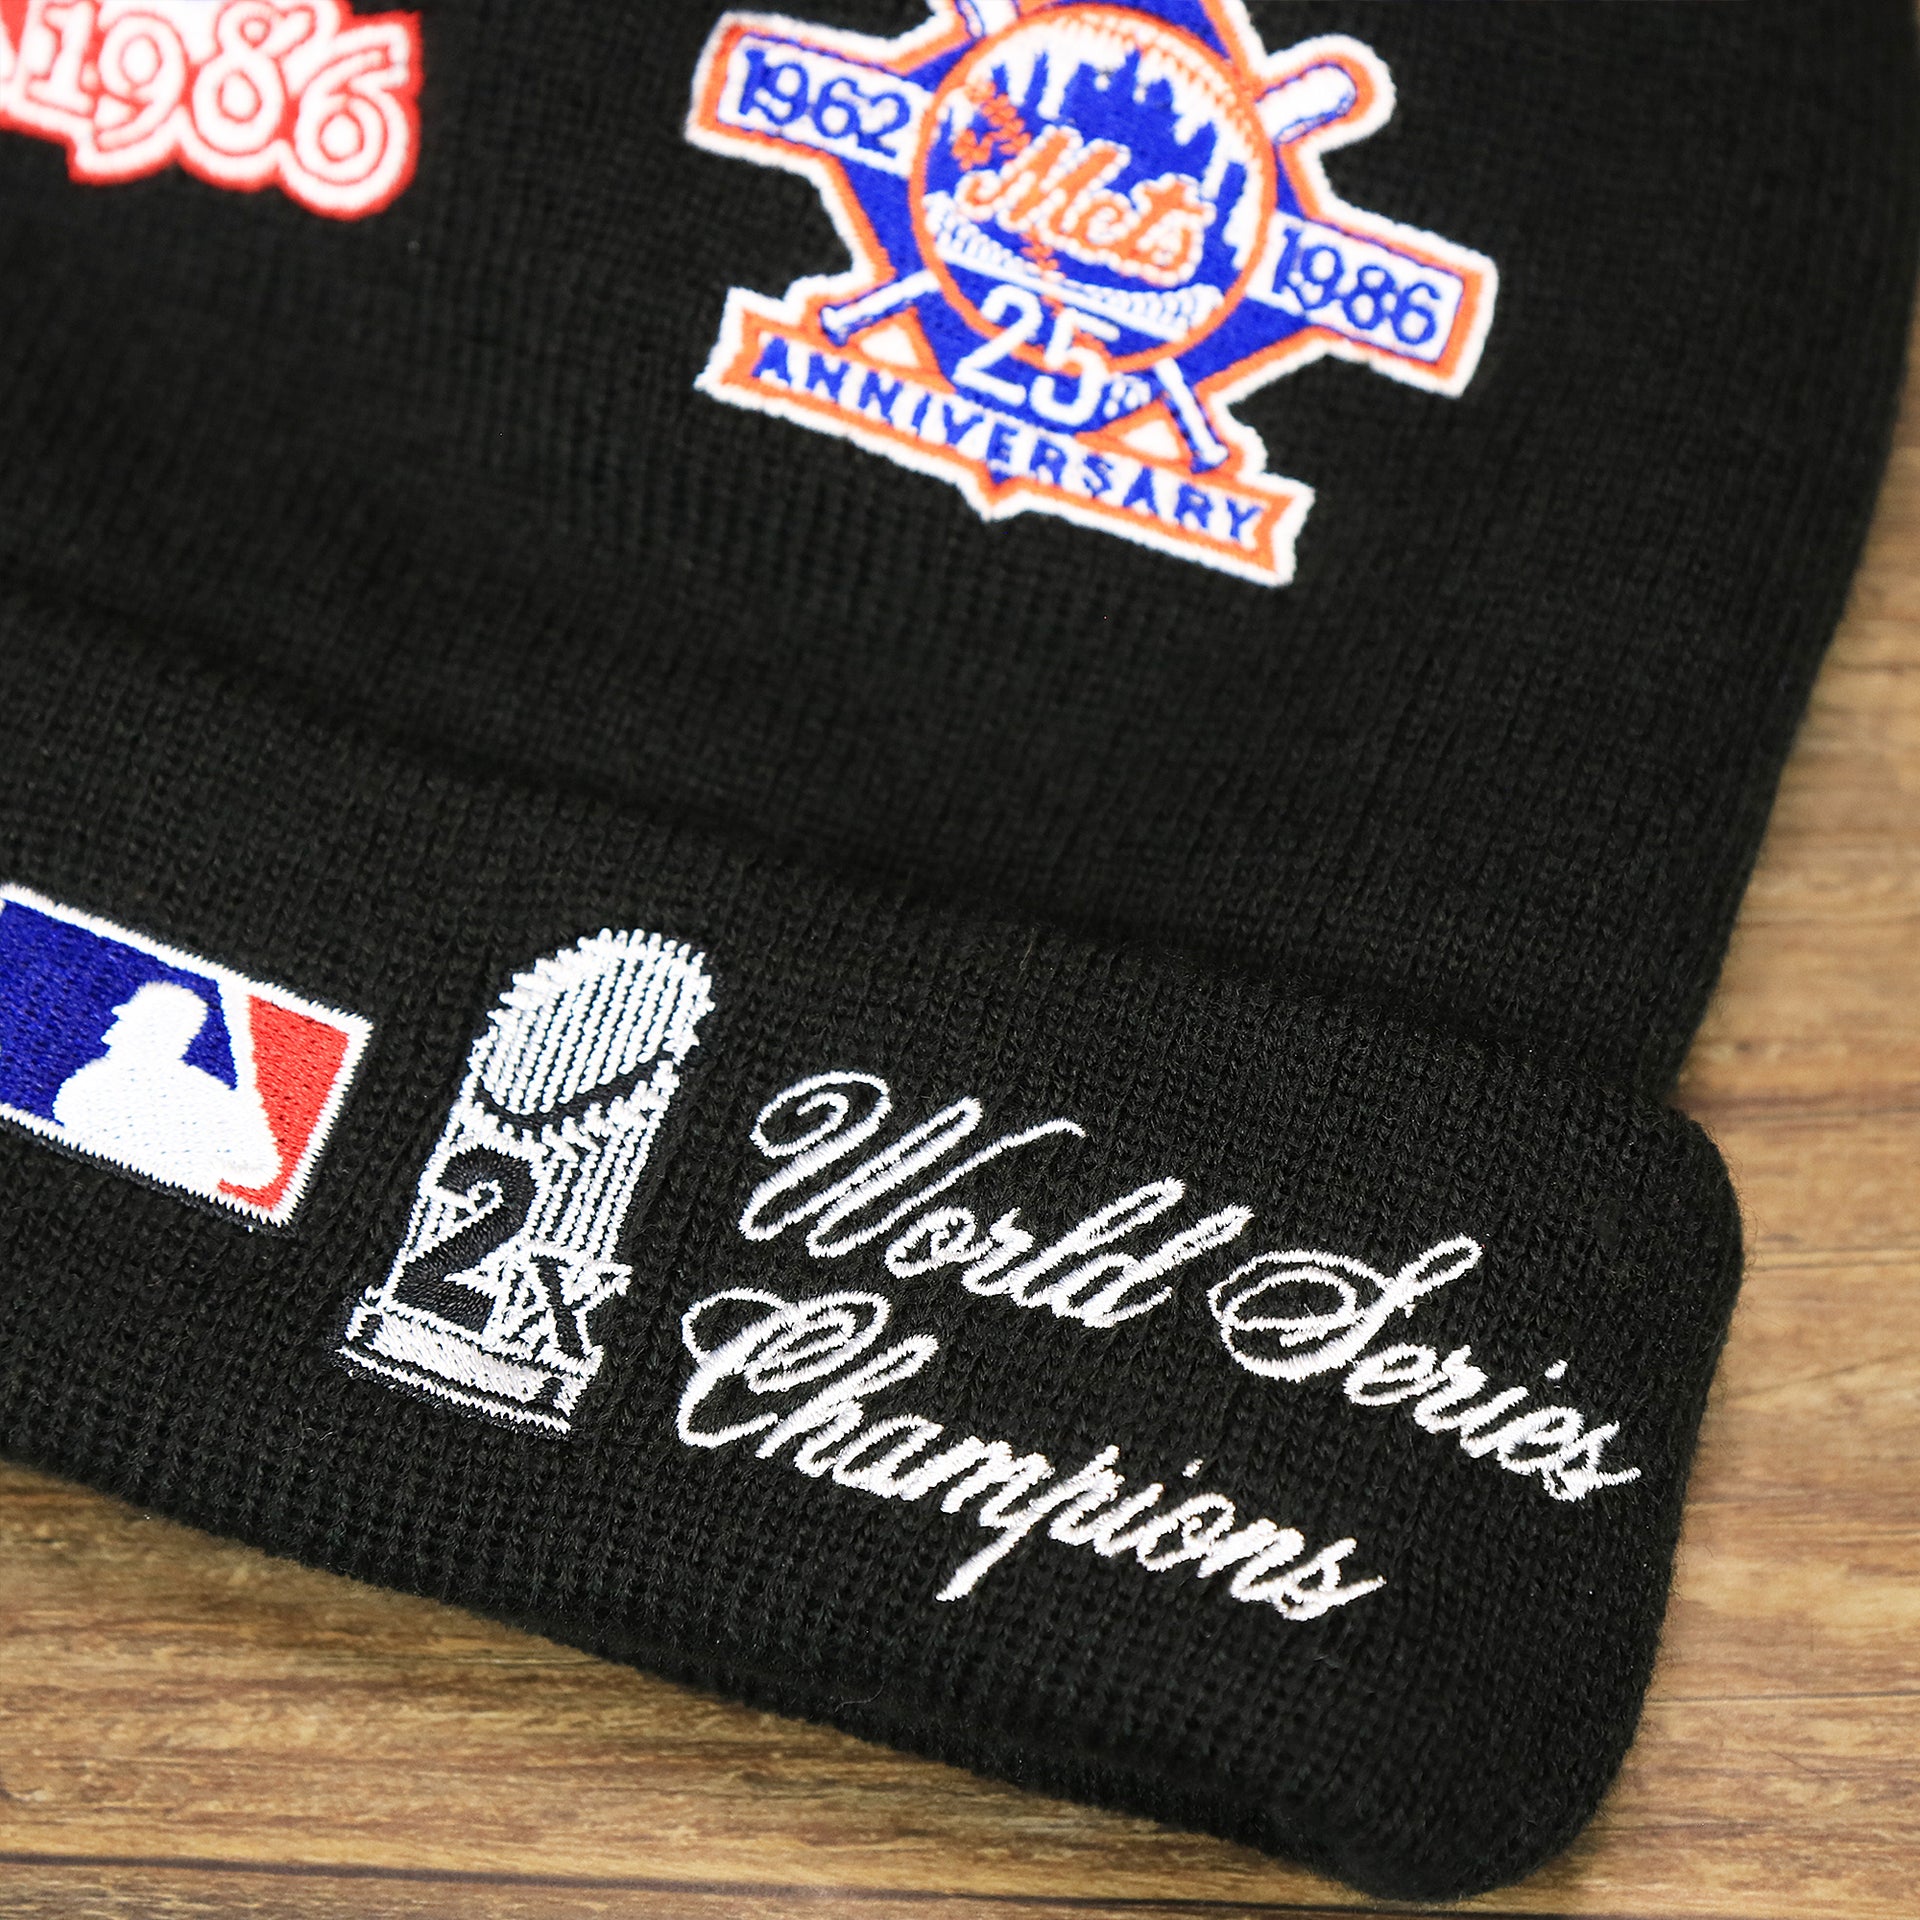 The World Series 2x Champions on the New York Mets All Over World Series Side Patch 2x Champion Knit Cuff Beanie | New Era, Black